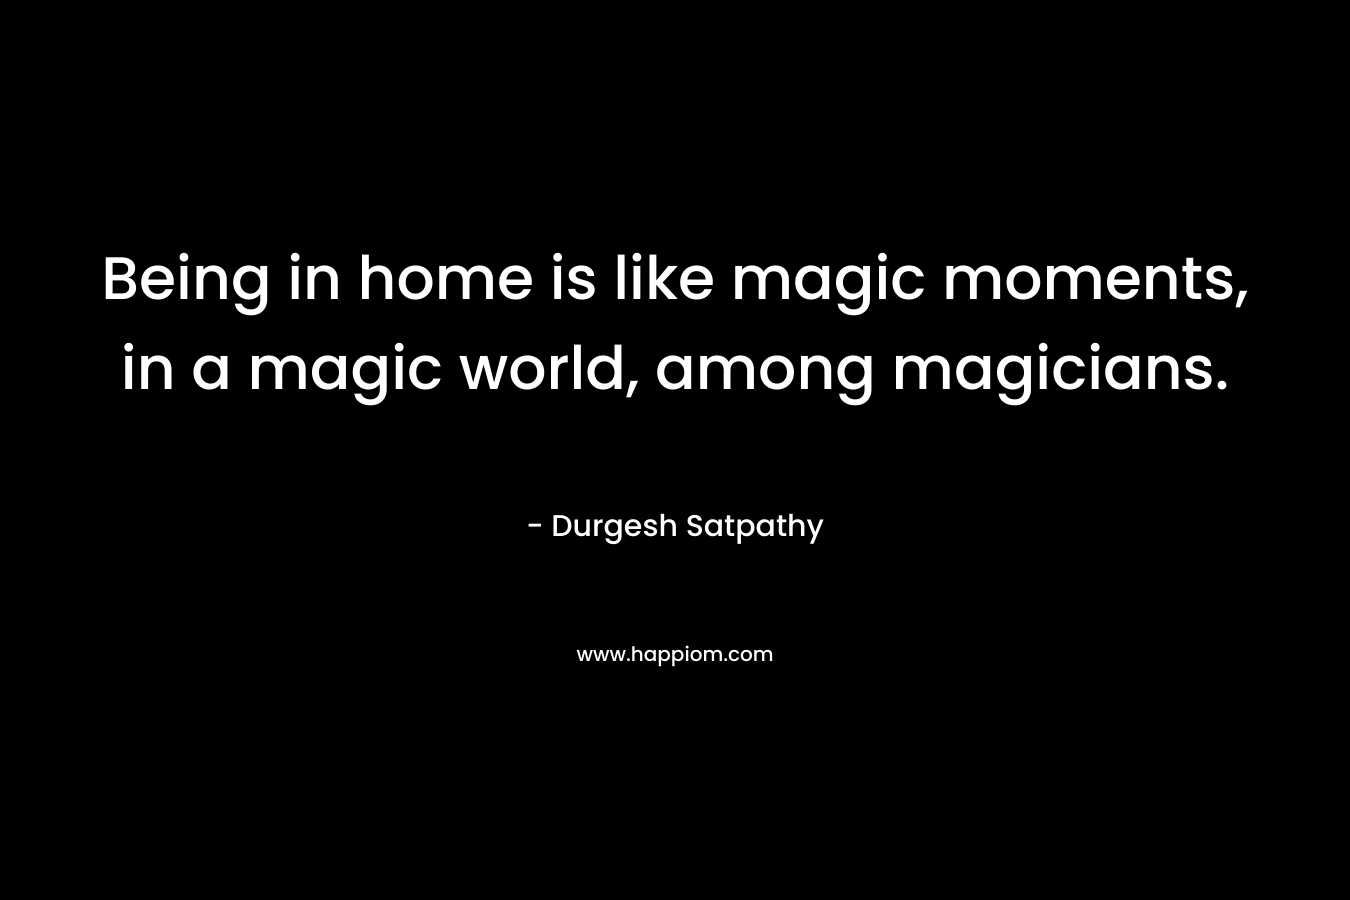 Being in home is like magic moments, in a magic world, among magicians. – Durgesh Satpathy